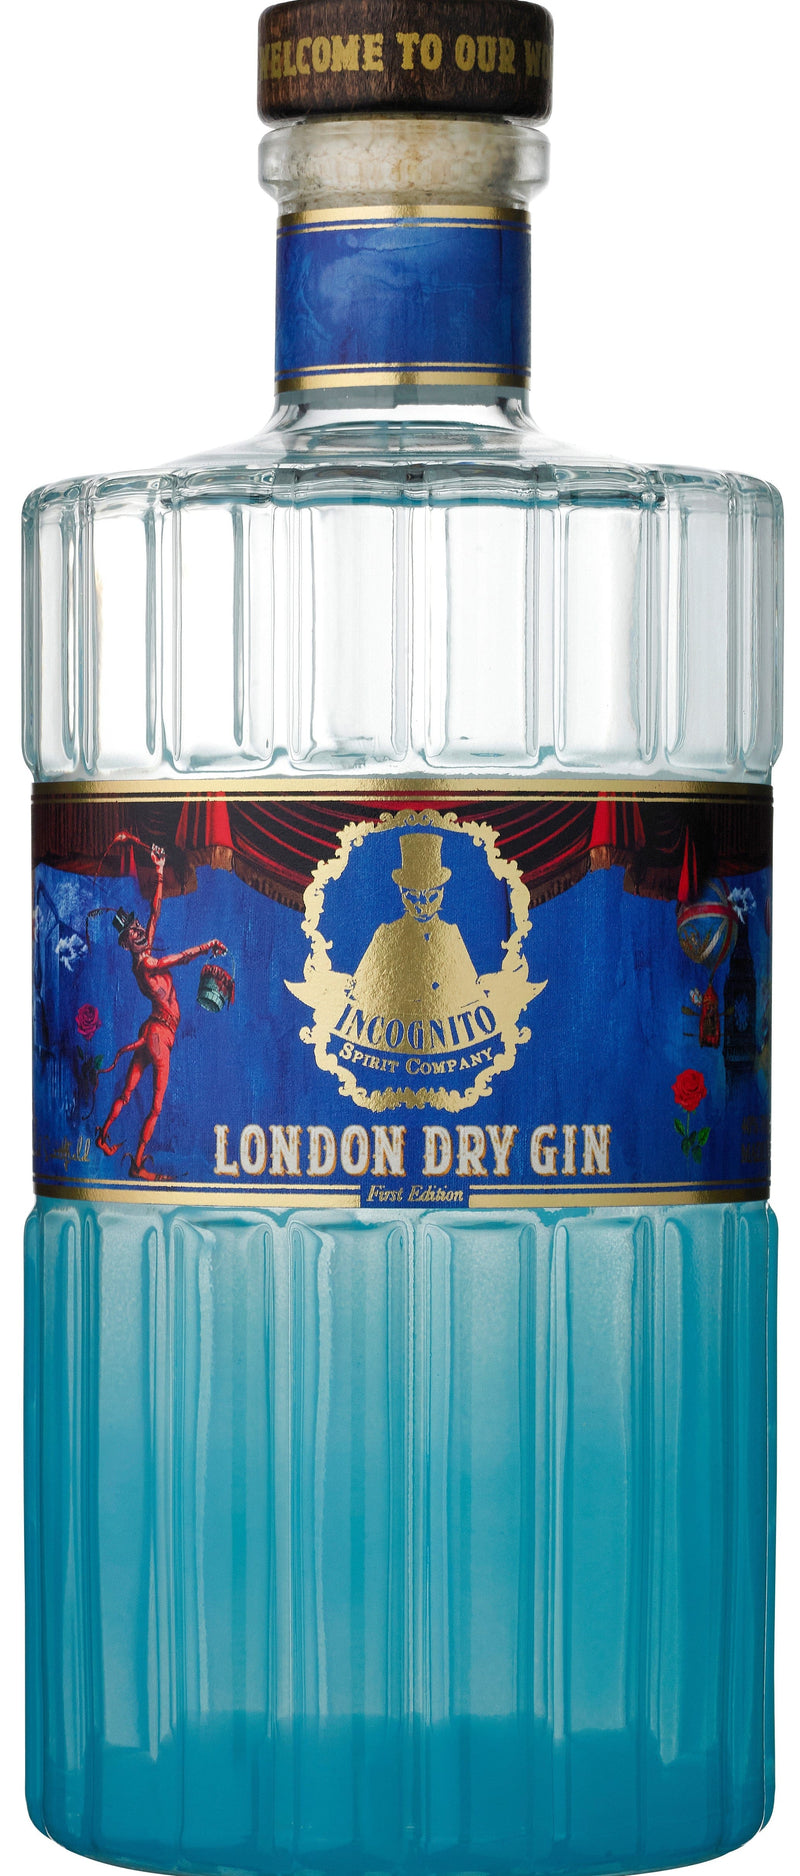 Incognito London Dry Gin 70cl